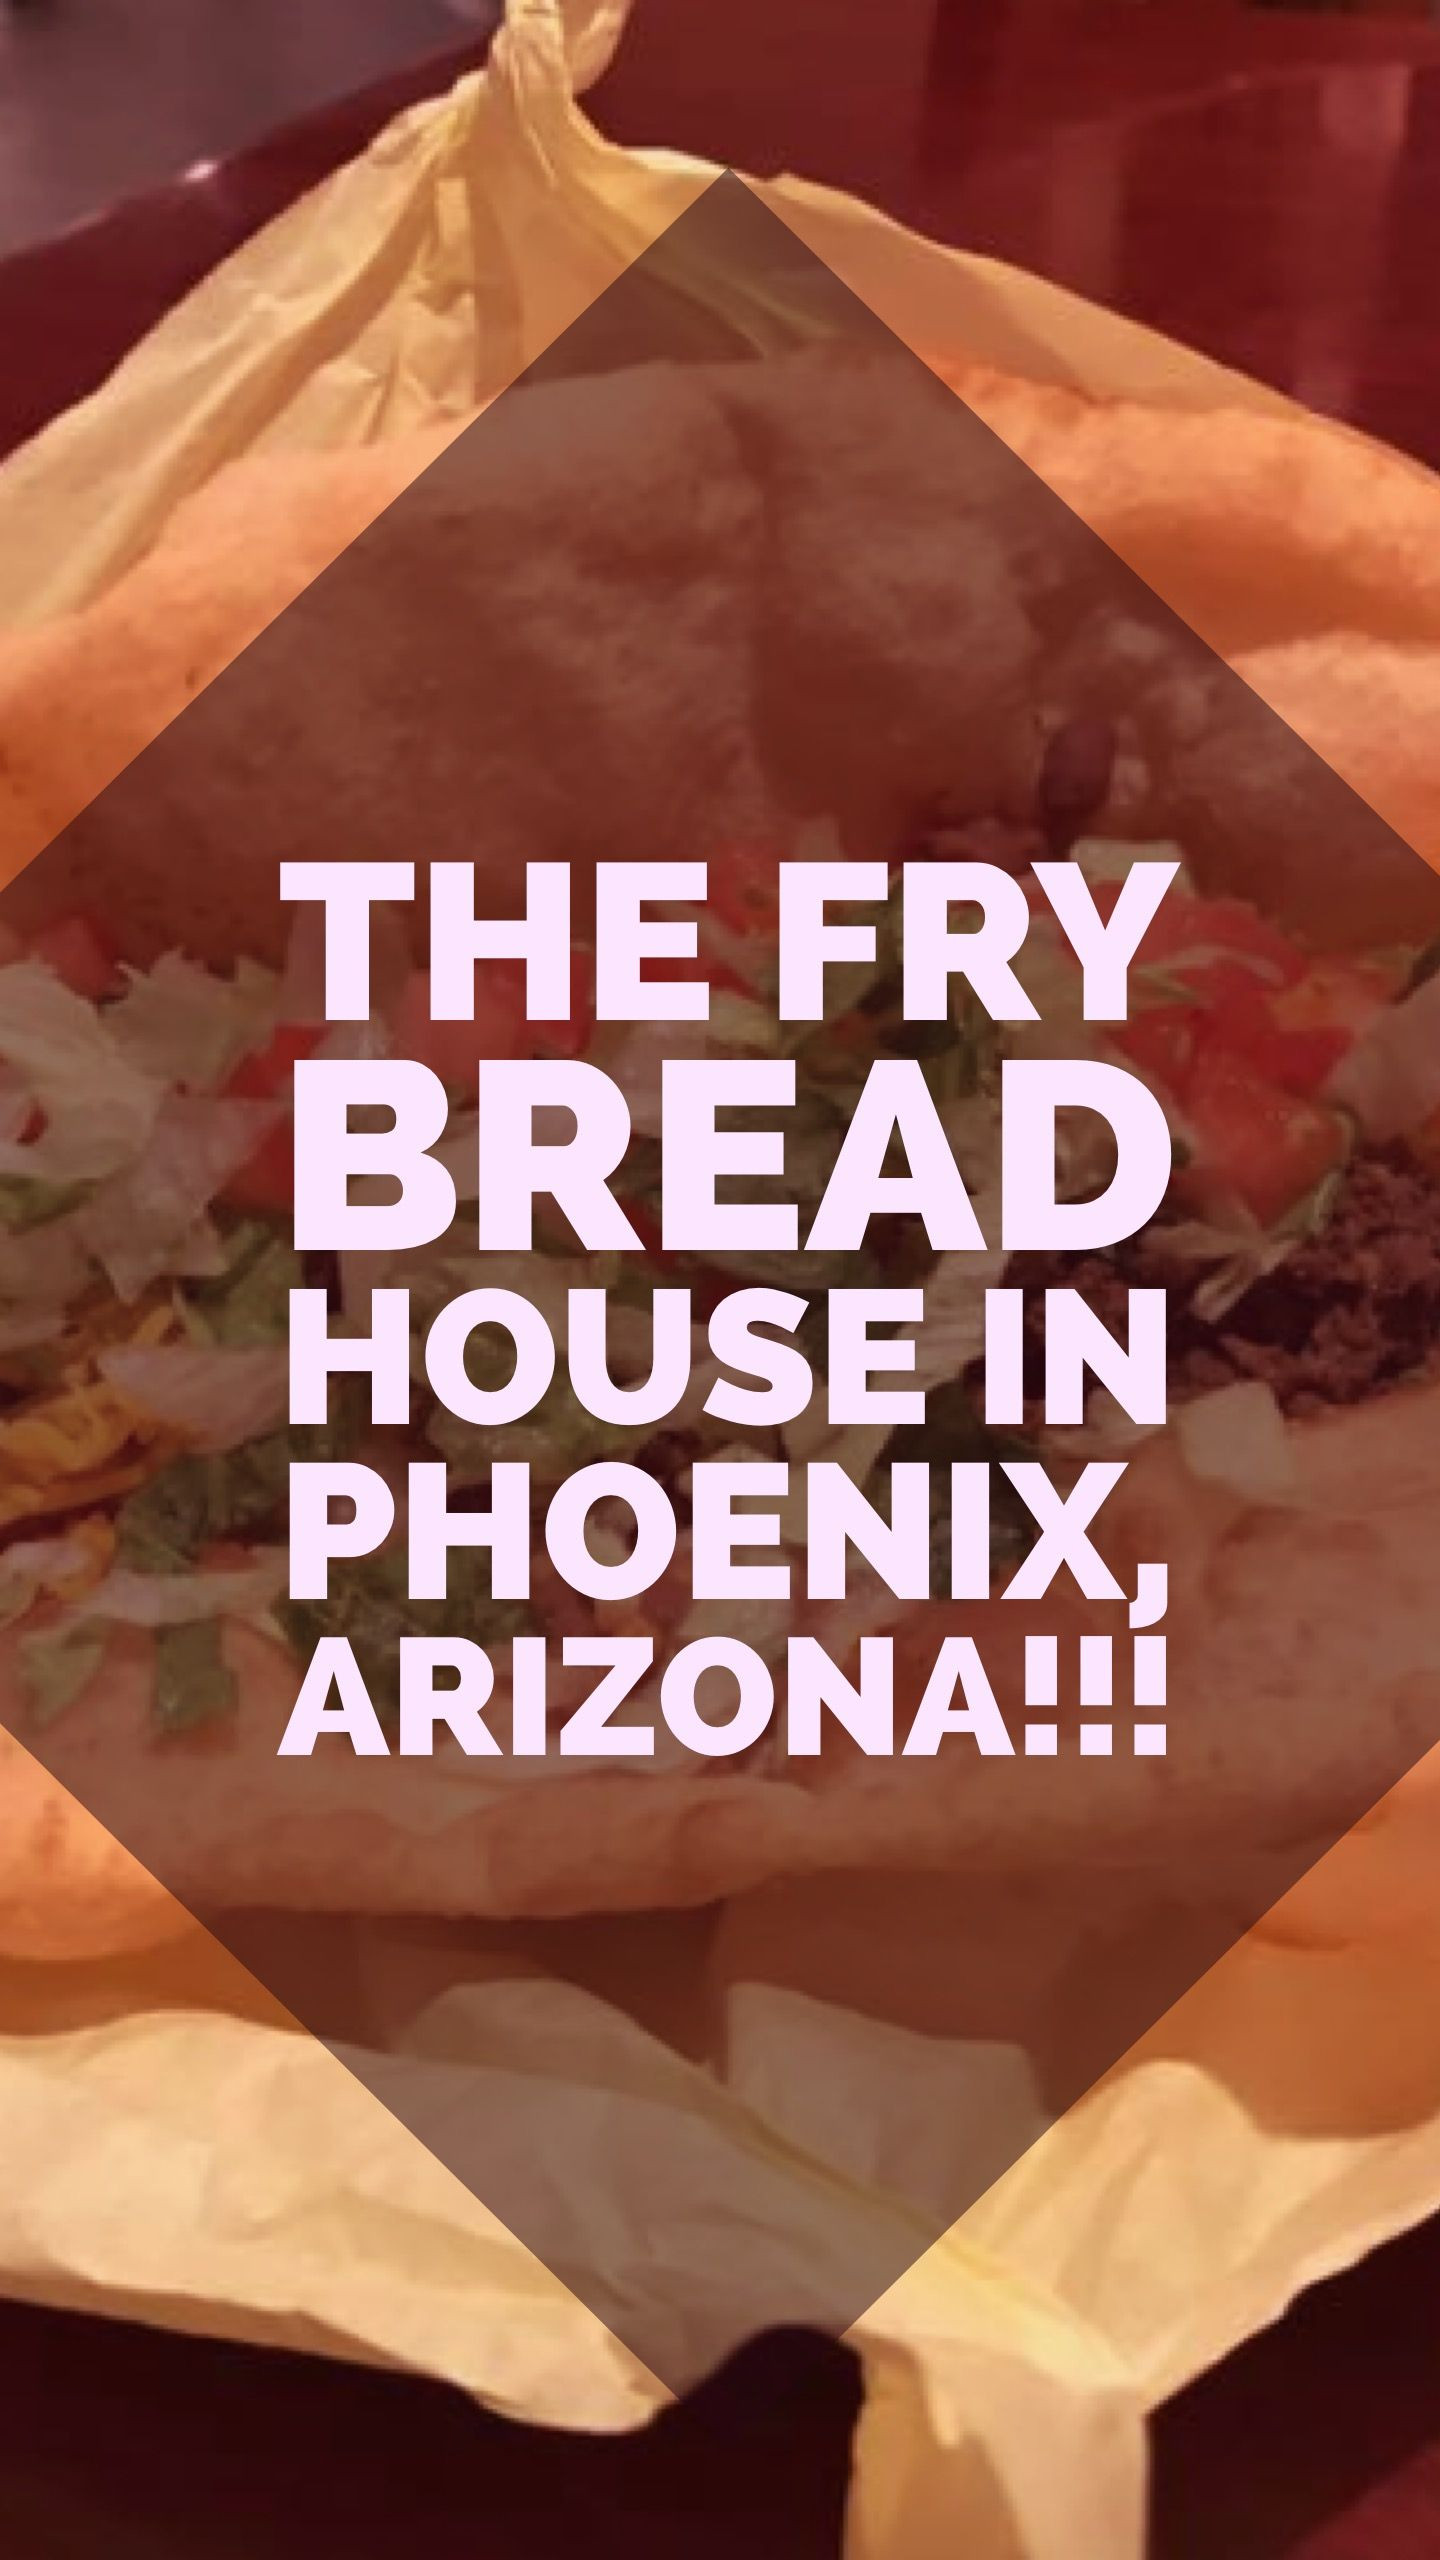 Indian Fry Bread House
 The Fry Bread House in Phoenix Arizona With images